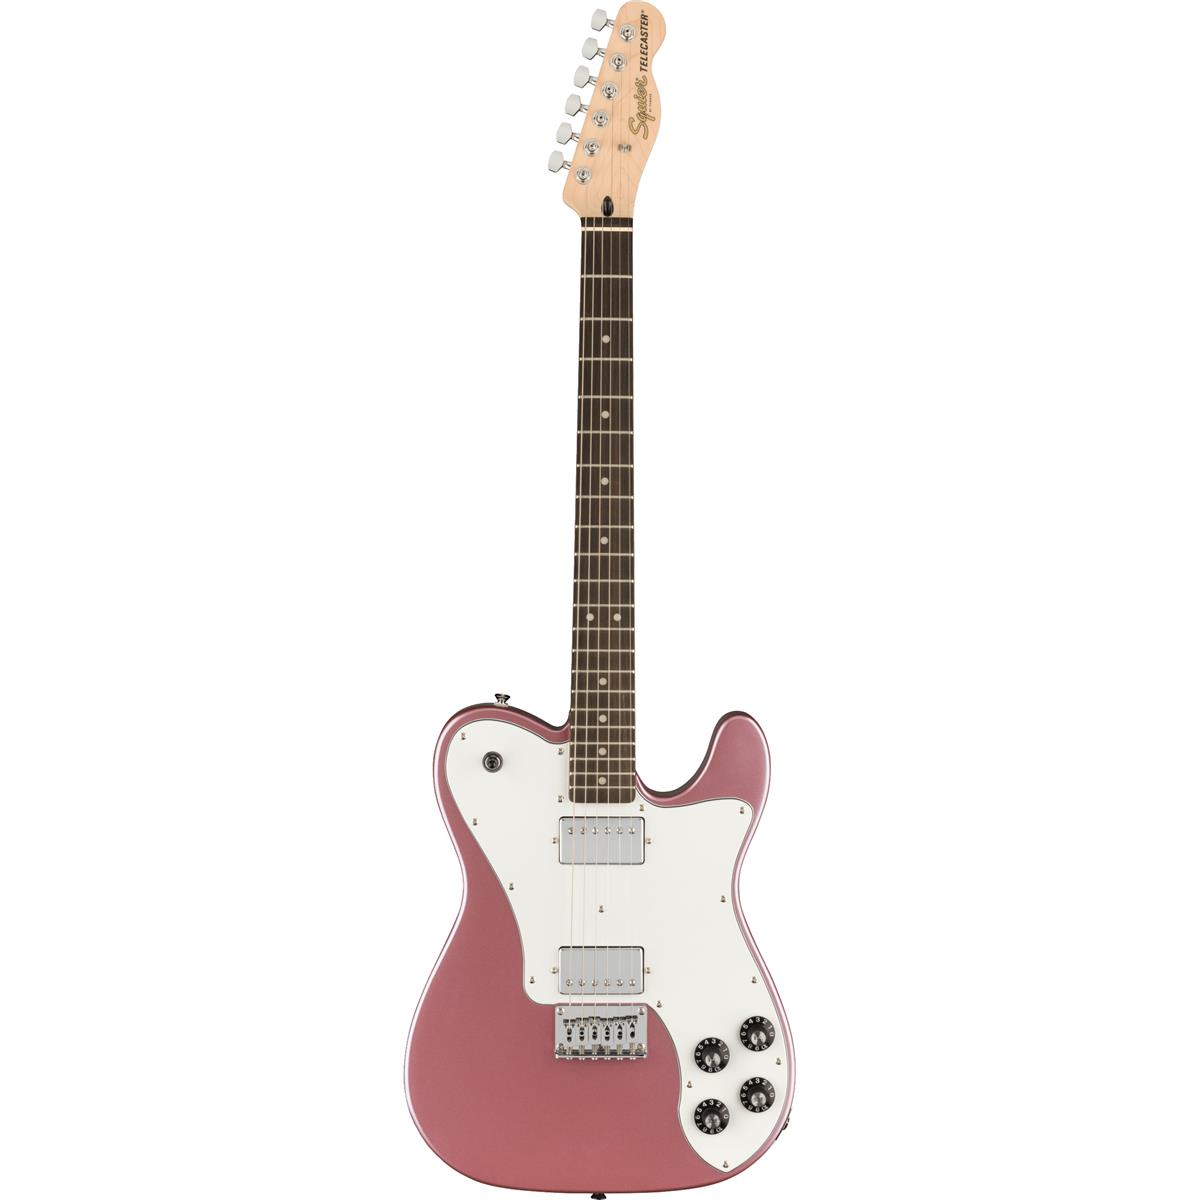 Image of Squier Affinity Series Telecaster Deluxe Guitar